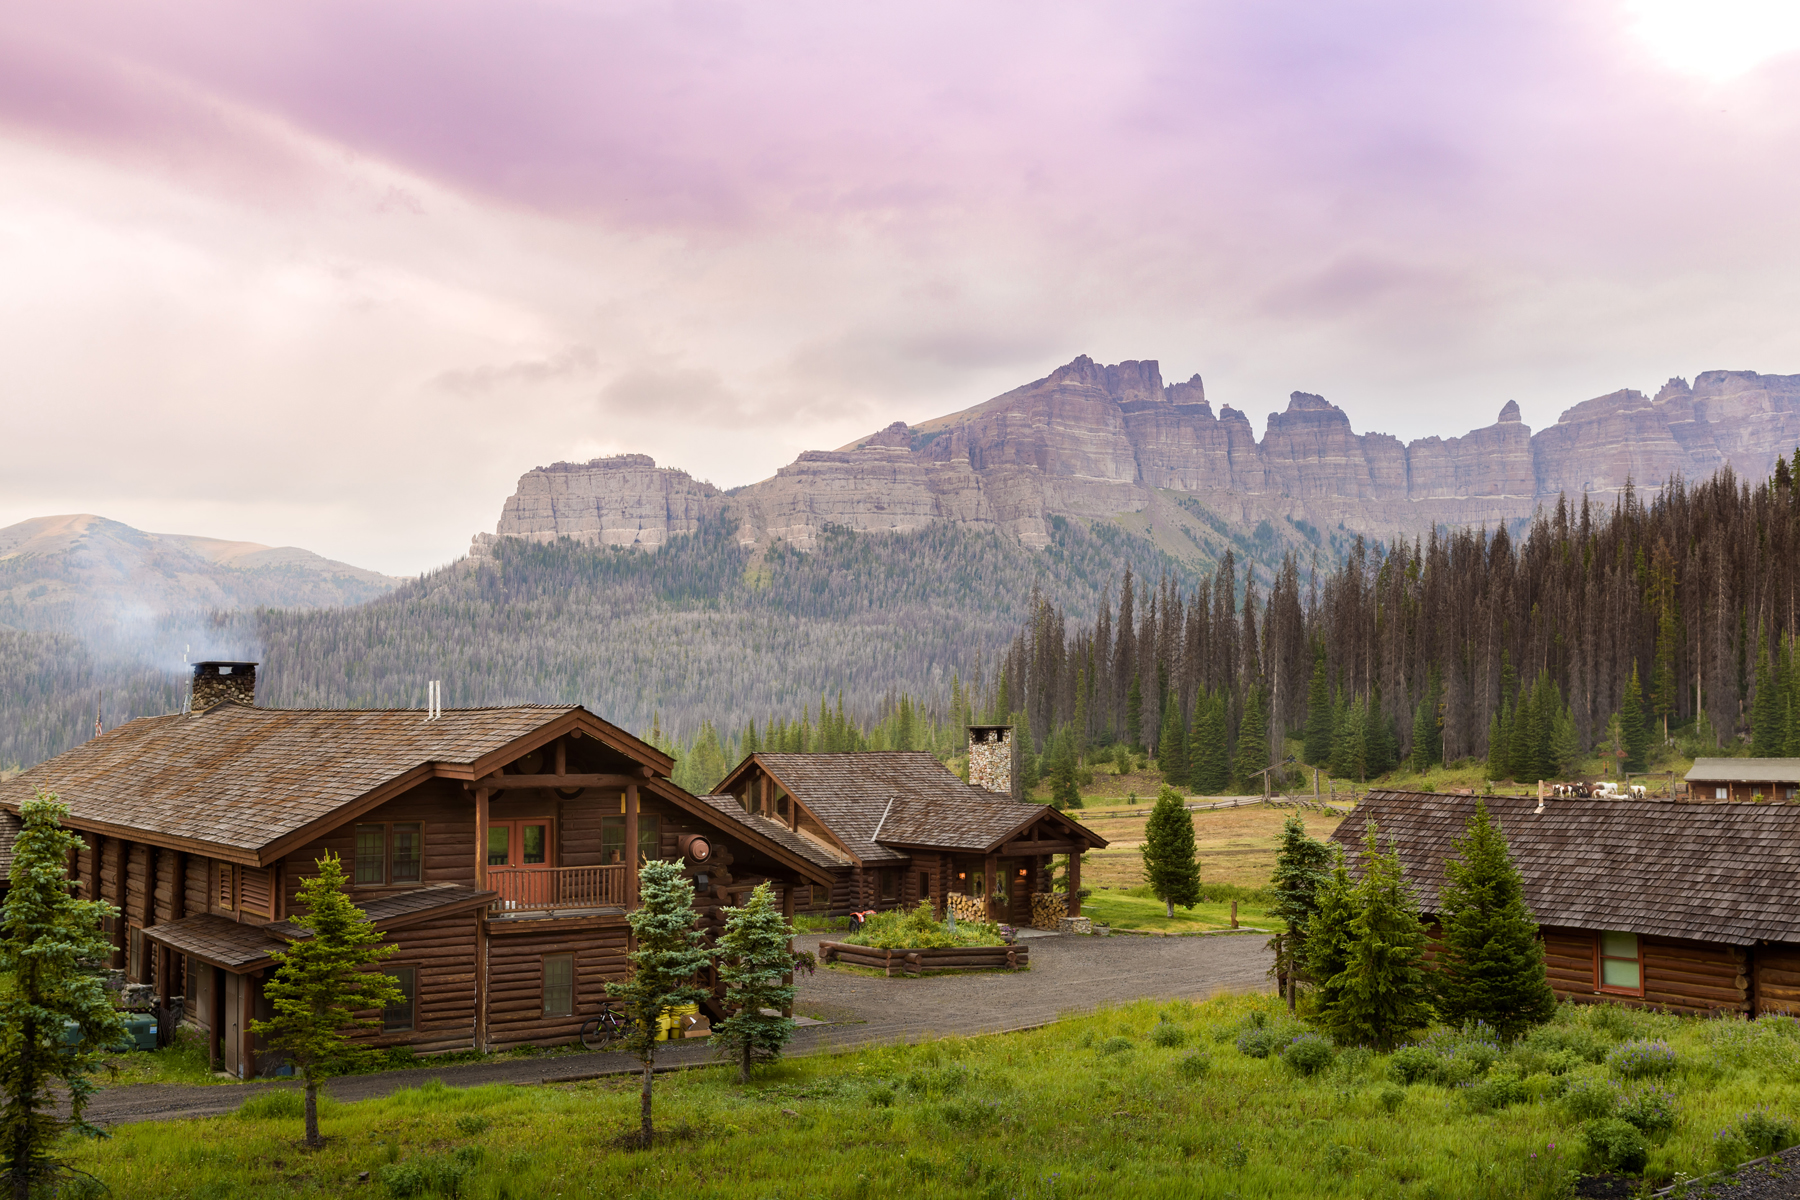 The historical Brooks Lake Lodge & Spa, recently called a “hidden gem” and Western Landmark lodge by Western Art & Architecture magazine, is backcountry fishing heaven for vacationers.